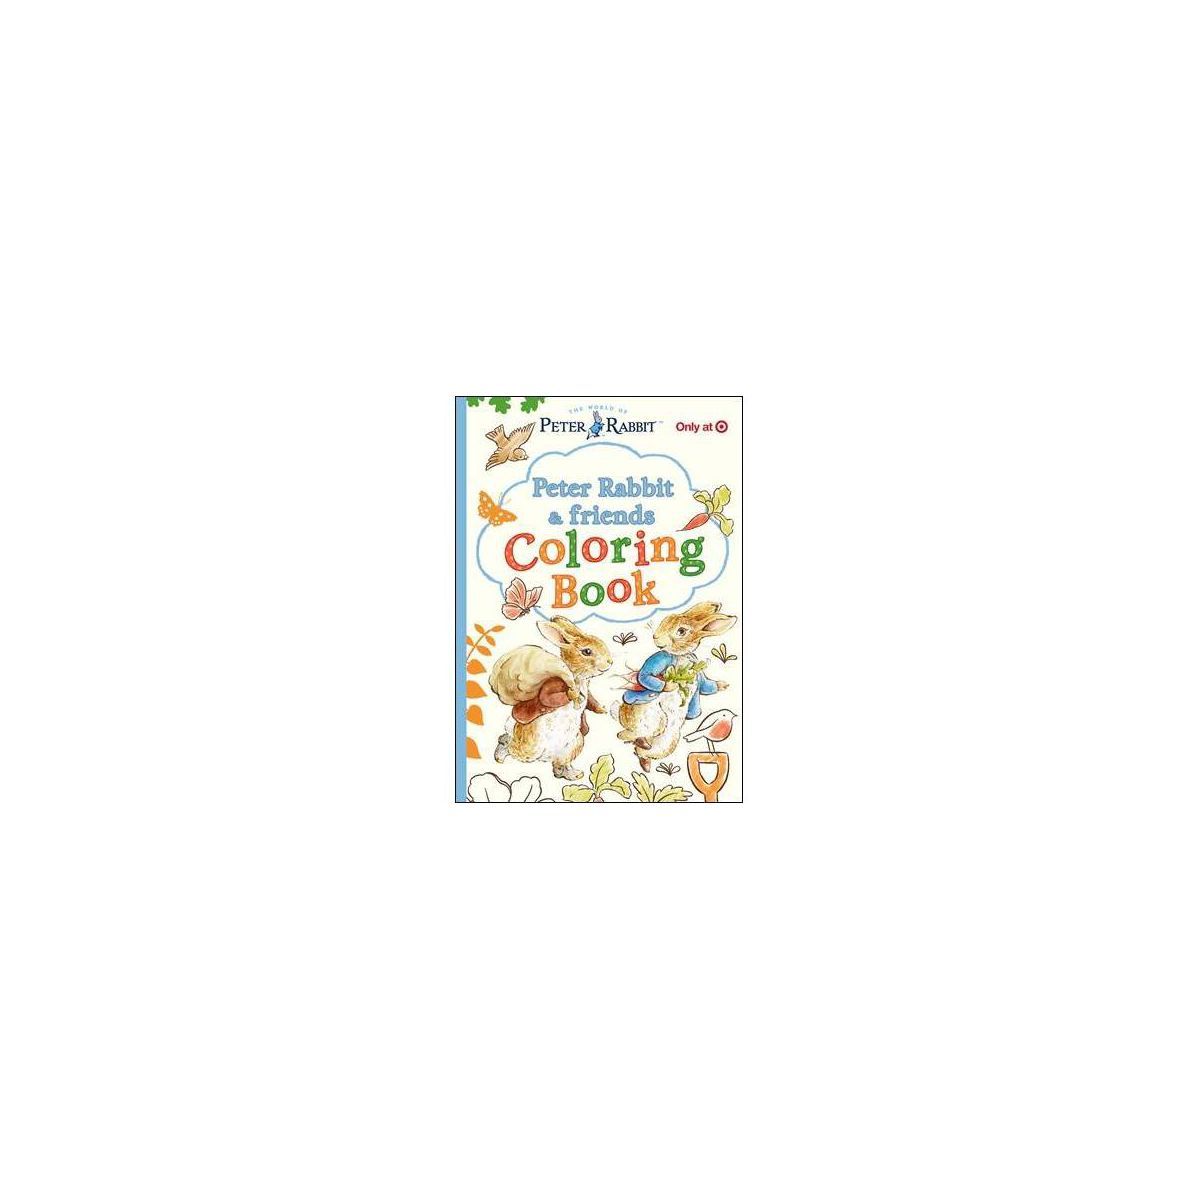 Peter Rabbit and Friend Coloring - Target Exclusive Edition - by Beatrix Potter (Board Book) | Target